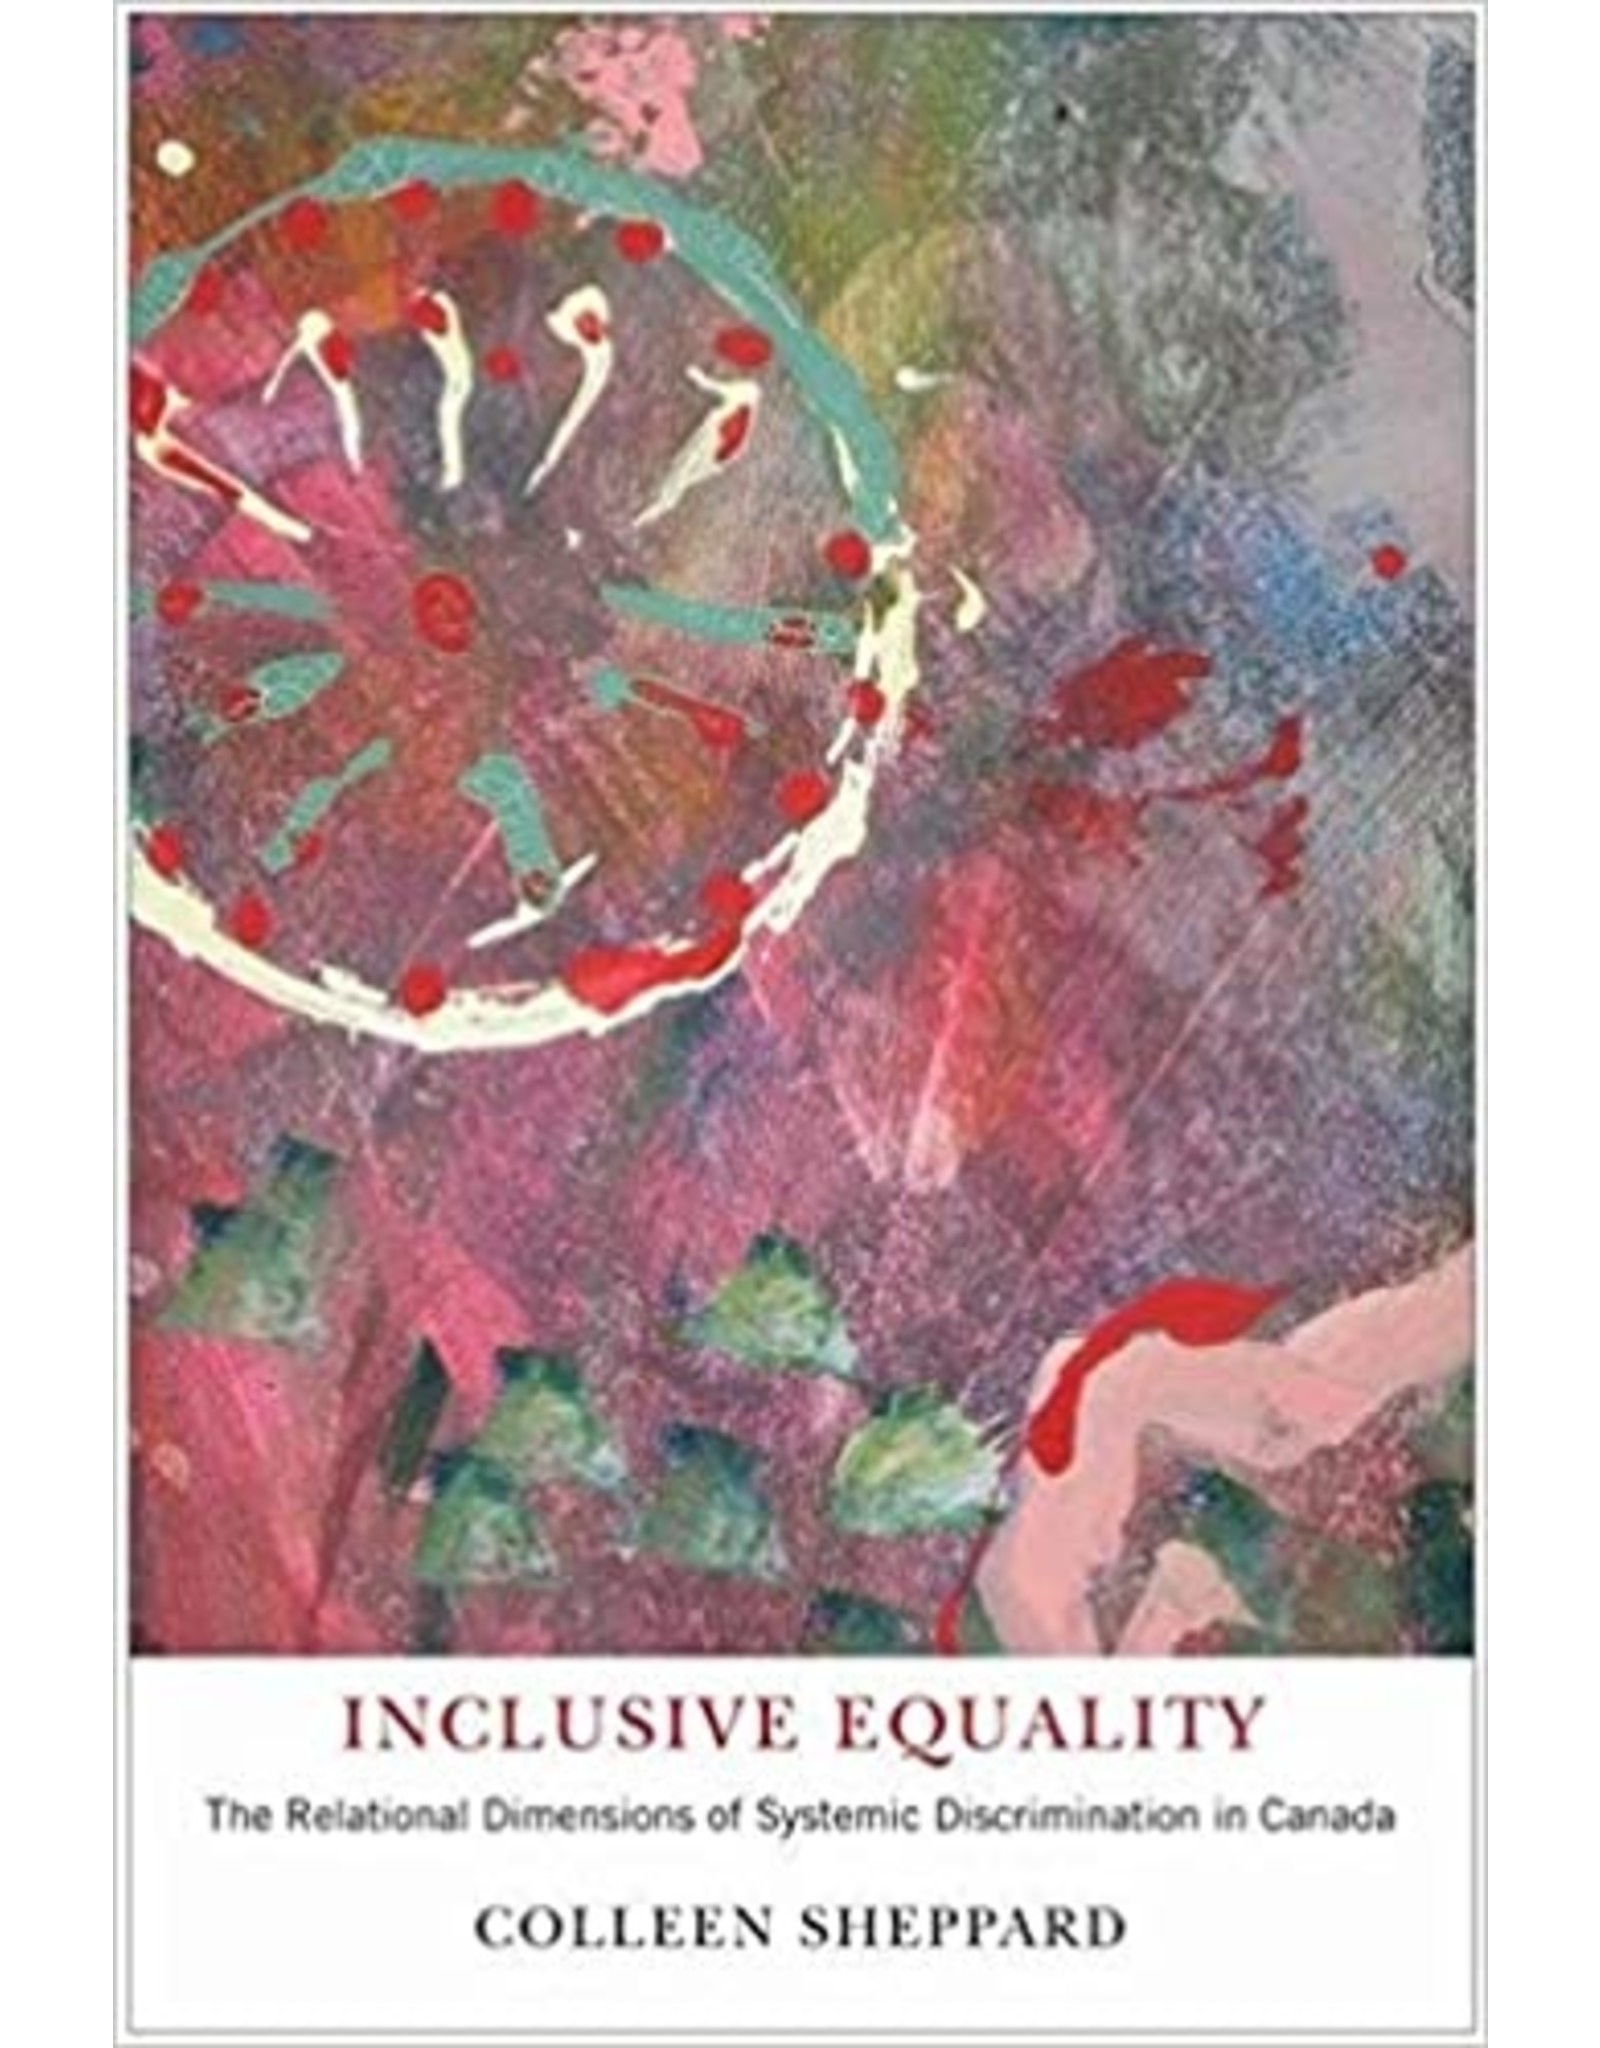 Textbook Inclusive Equality: The Relational Dimensions of Systemic Discrimination in Canada